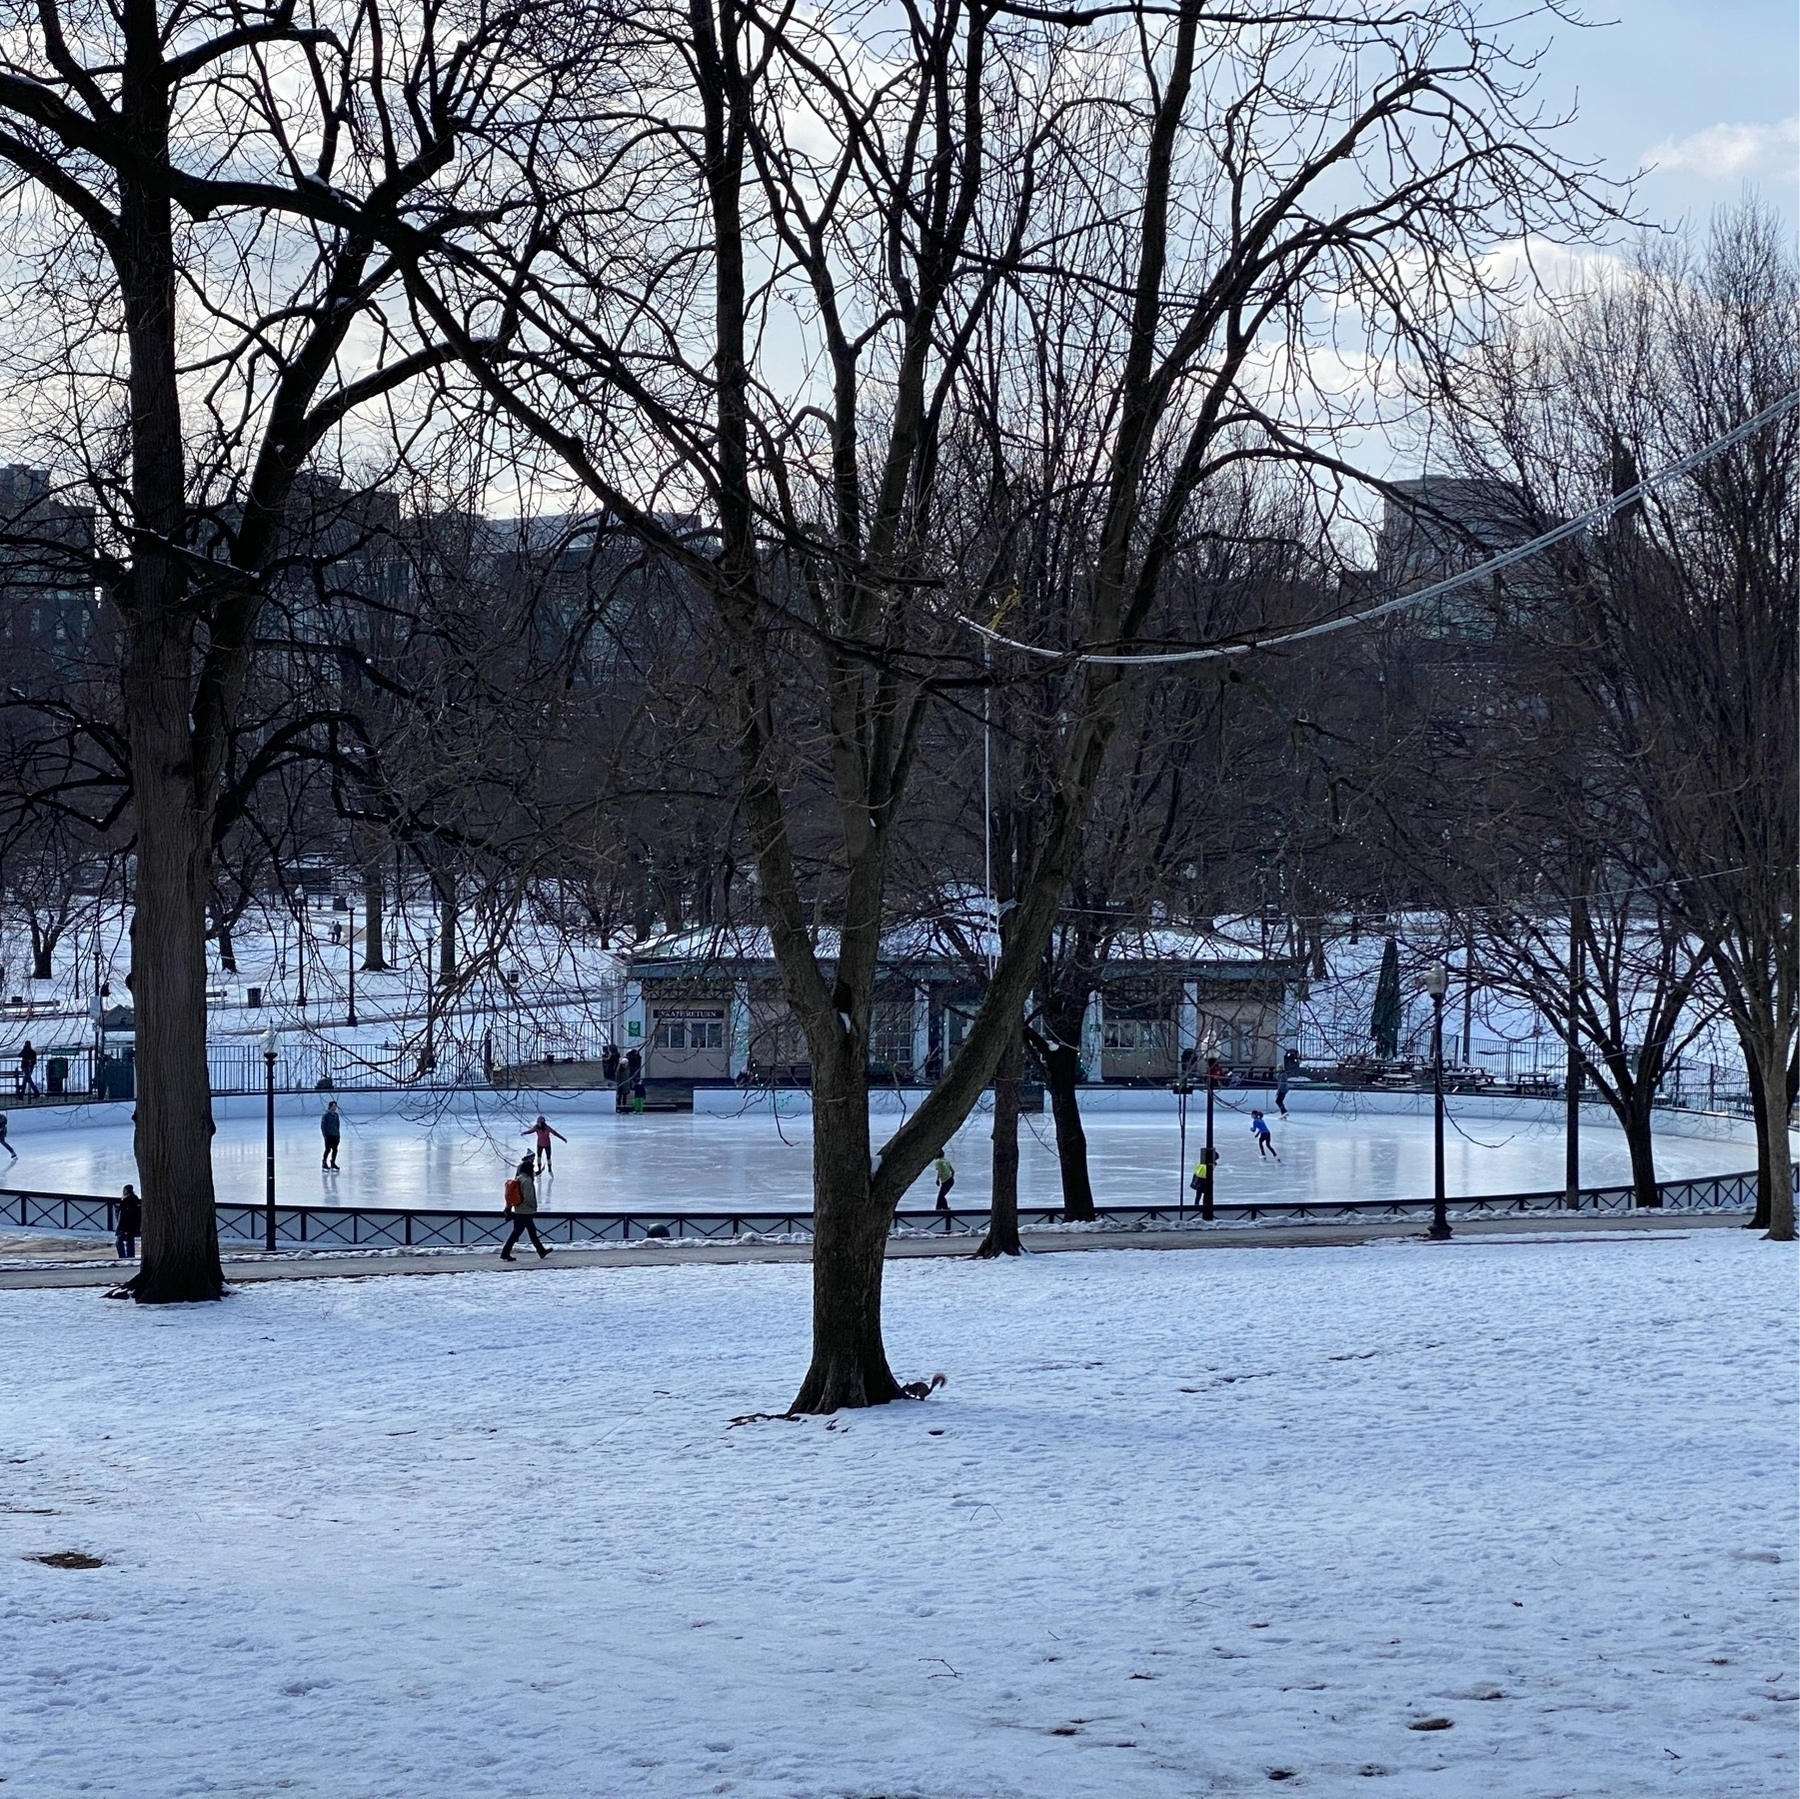 View of Frog Pond skating rink with tree trunks in the forground.